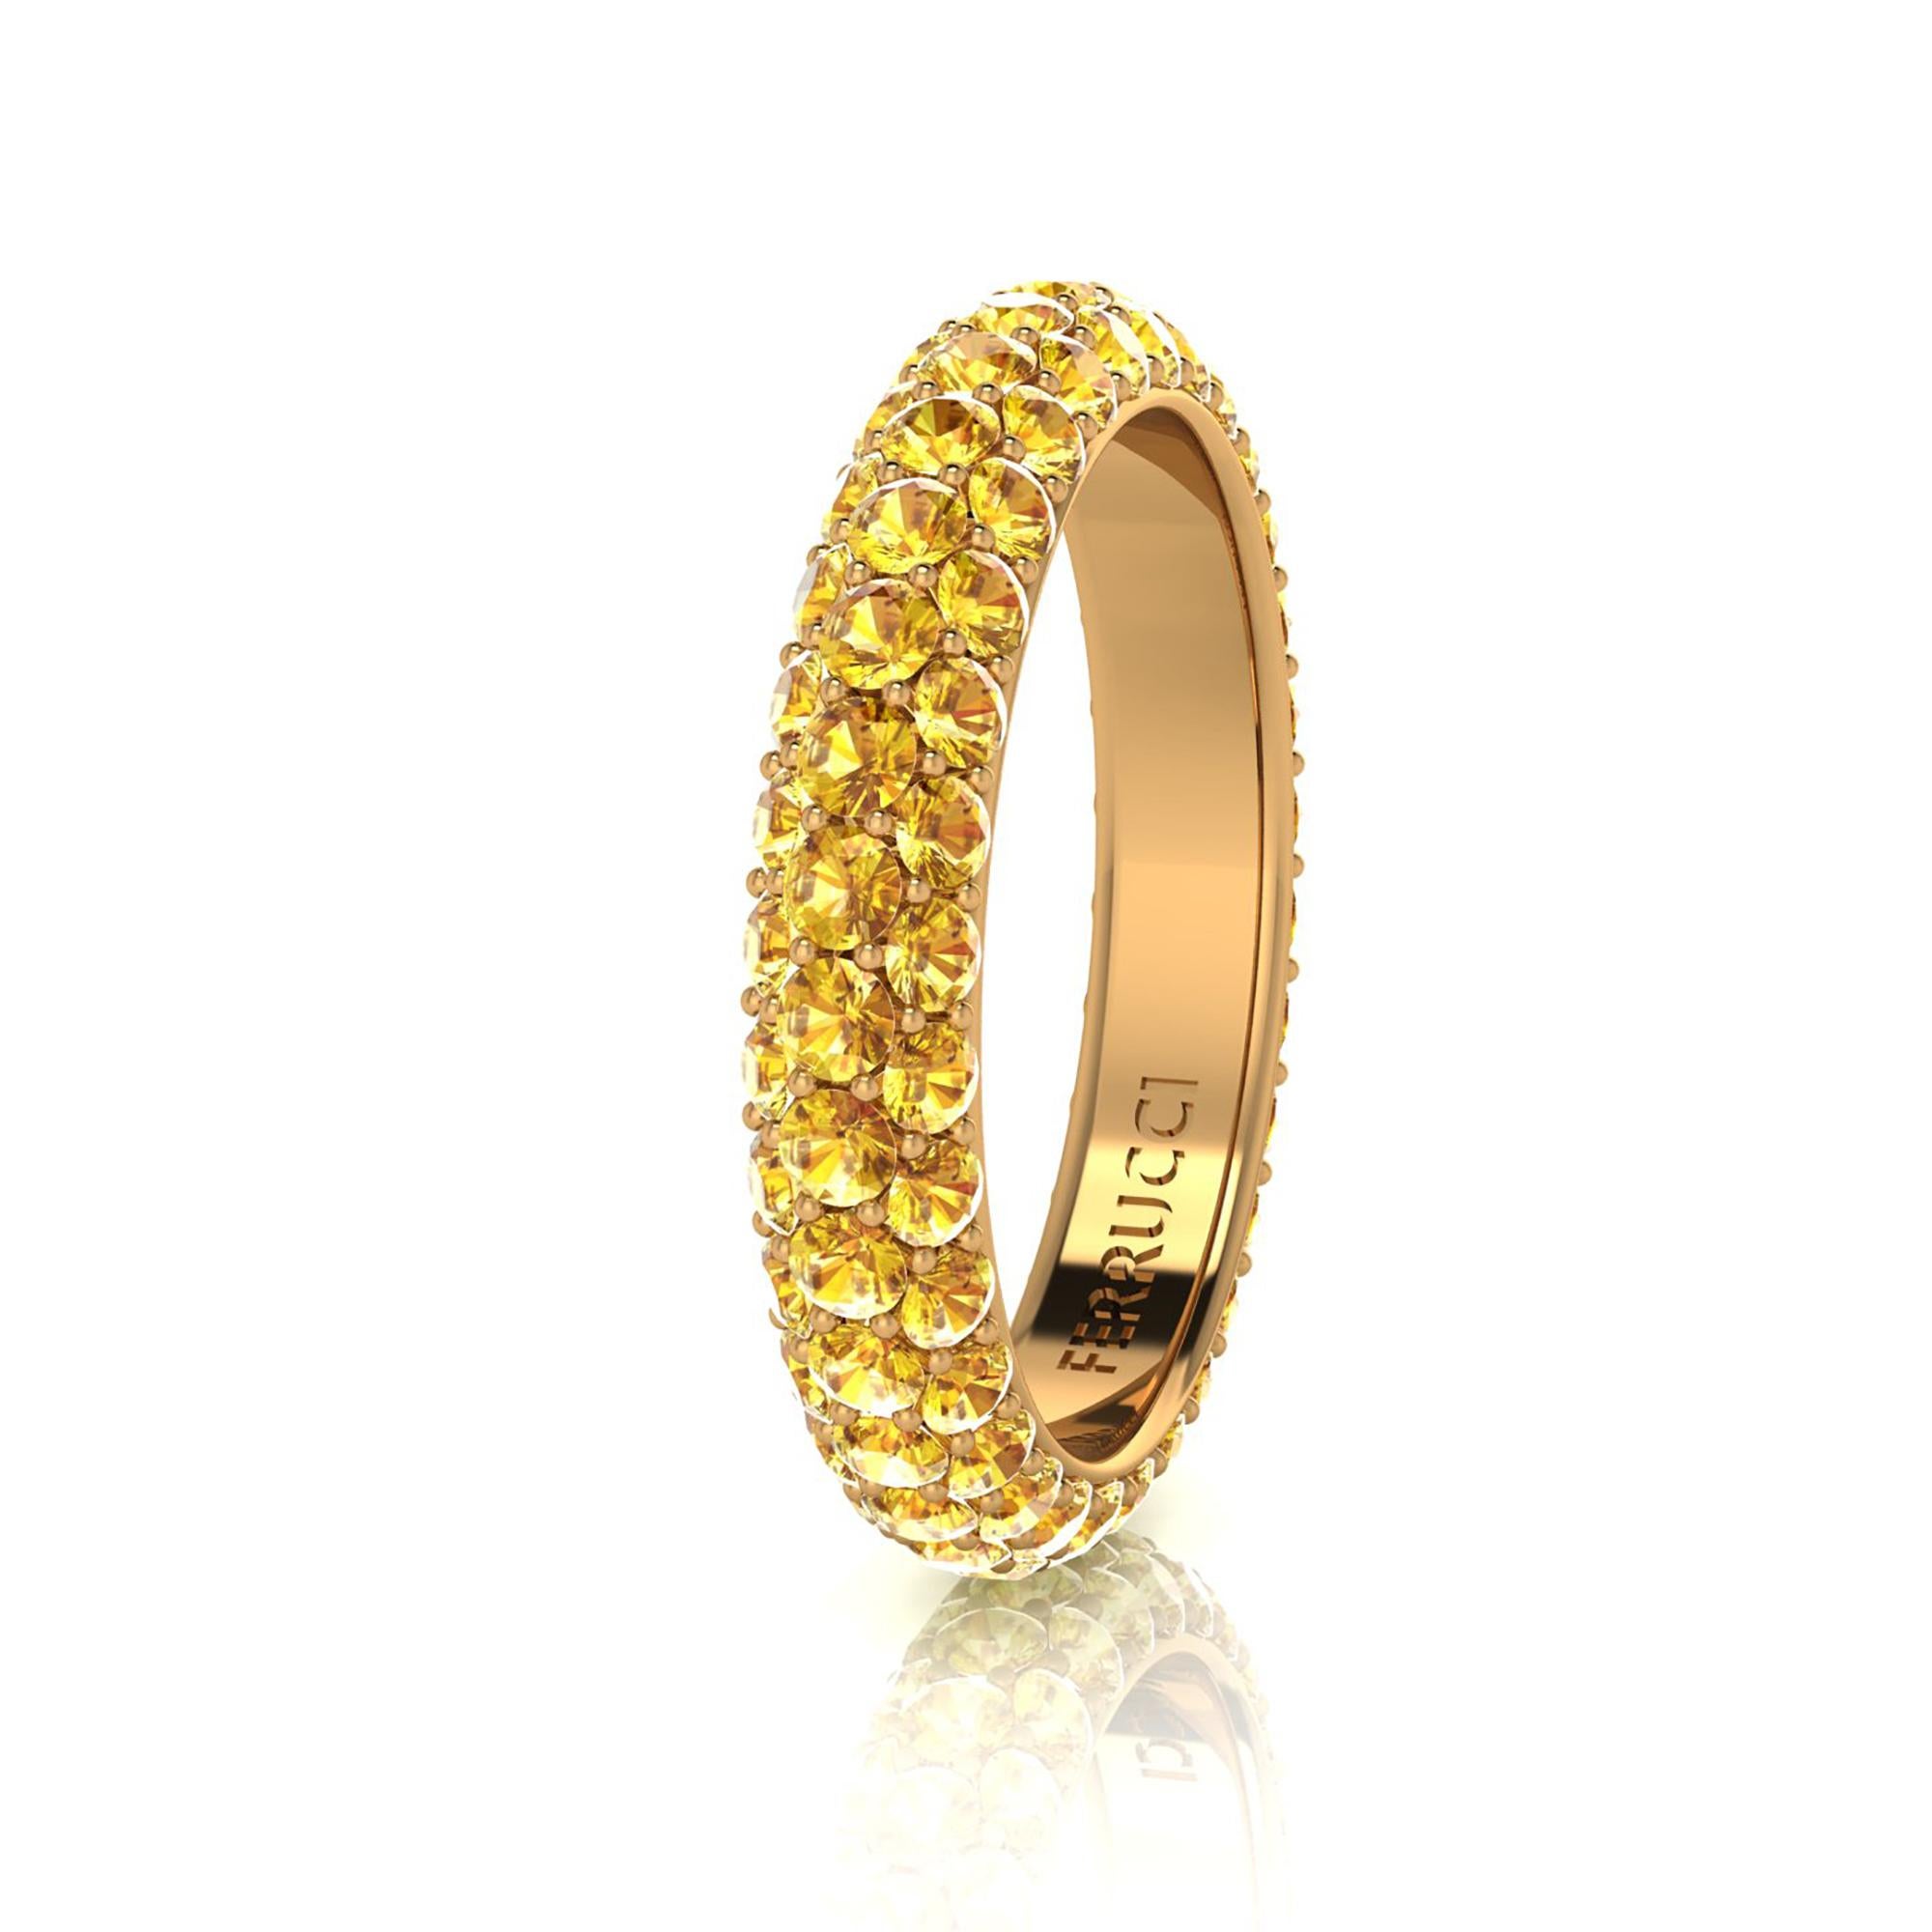 FERRUCCI Yellow sapphires eternity ring,  with an approximate total carat weight of 2.00 carat, hand made in New York City with the best Italian craftsmanship, conceived in 18k yellow gold.
Classic, sophisticated, gorgeous look, everlasting in